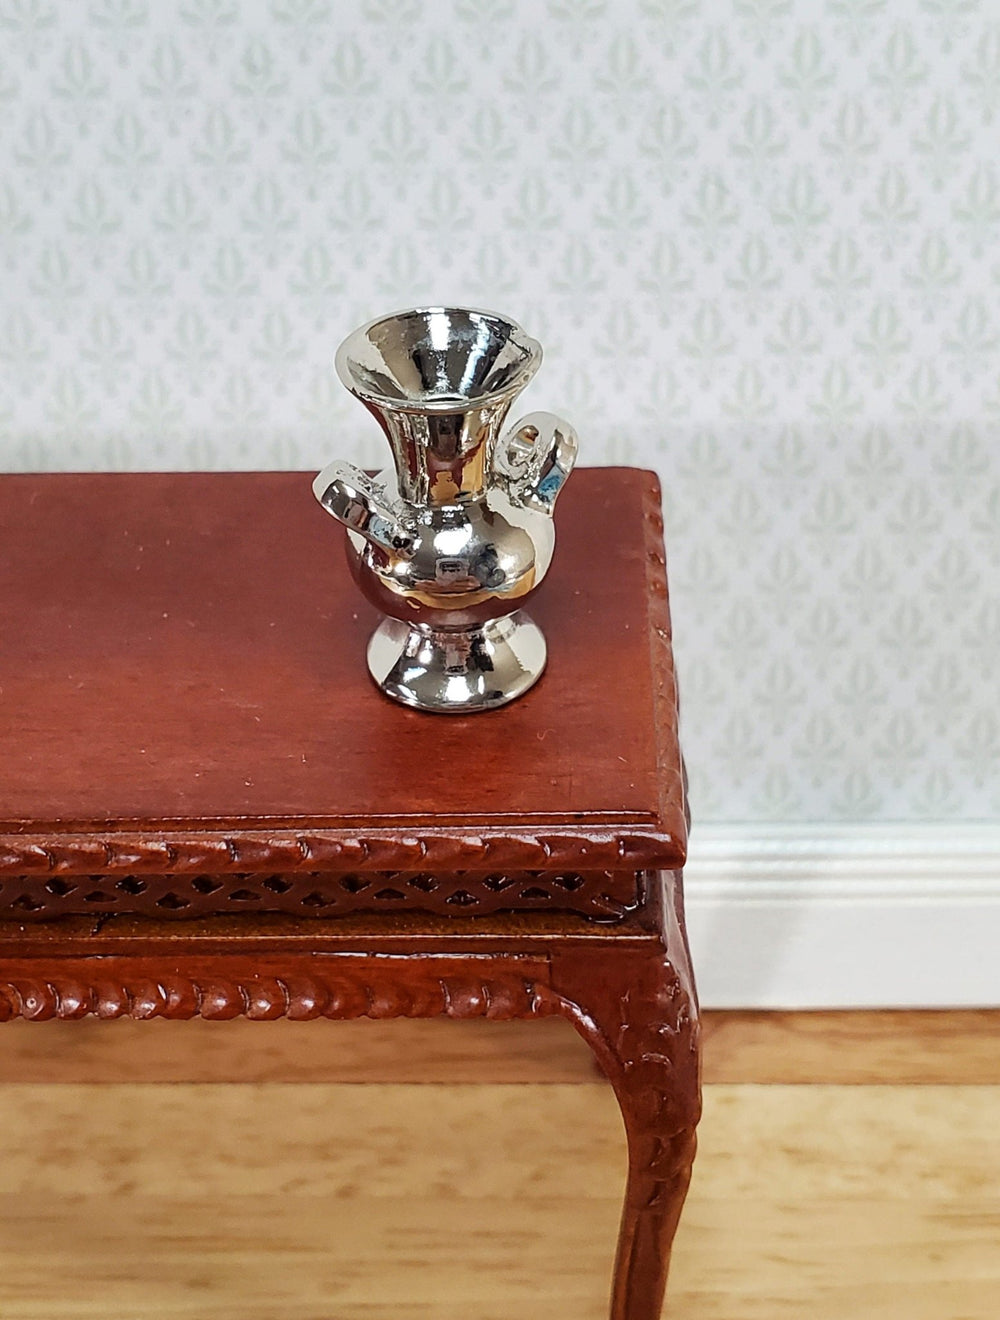 Dollhouse Vase Urn Silver Metal for Flowers or Decoration 1:12 Scale Miniature - Miniature Crush